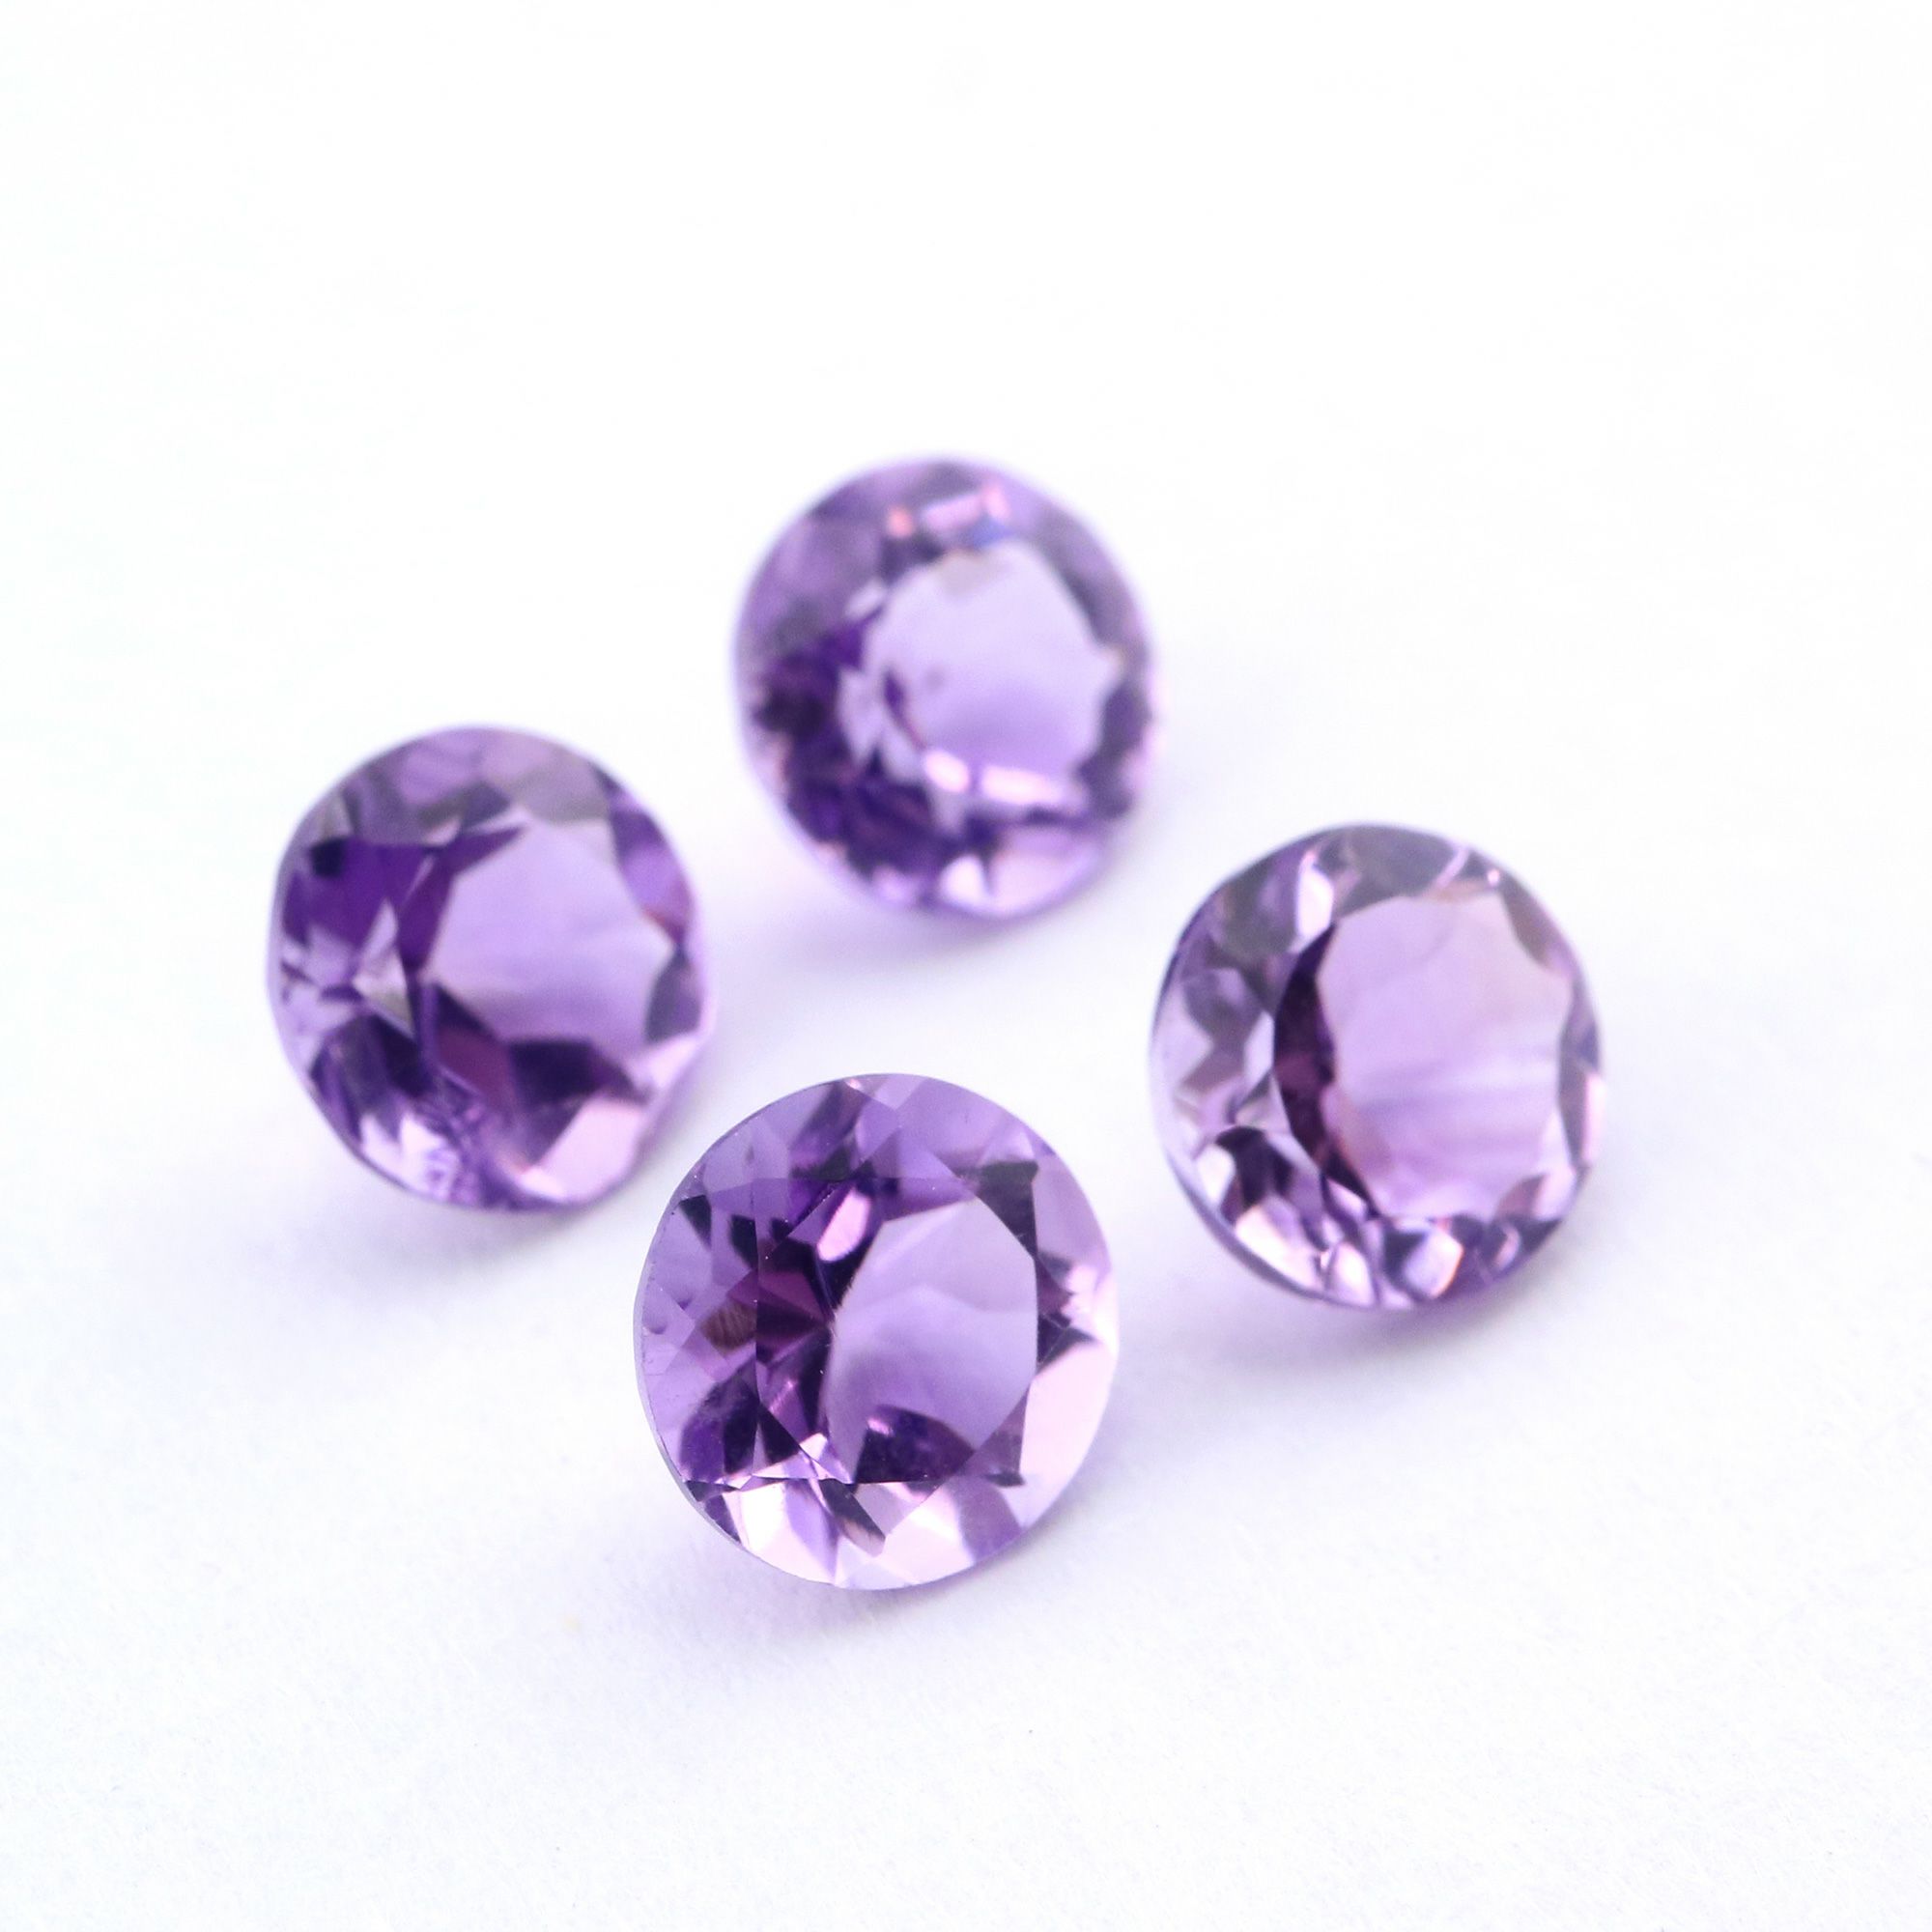 1Pcs Round Purple Amethyst February Birthstone Faceted Cut Loose Gemstone Nature Semi Precious Stone DIY Jewelry Supplies 4110169 - Click Image to Close